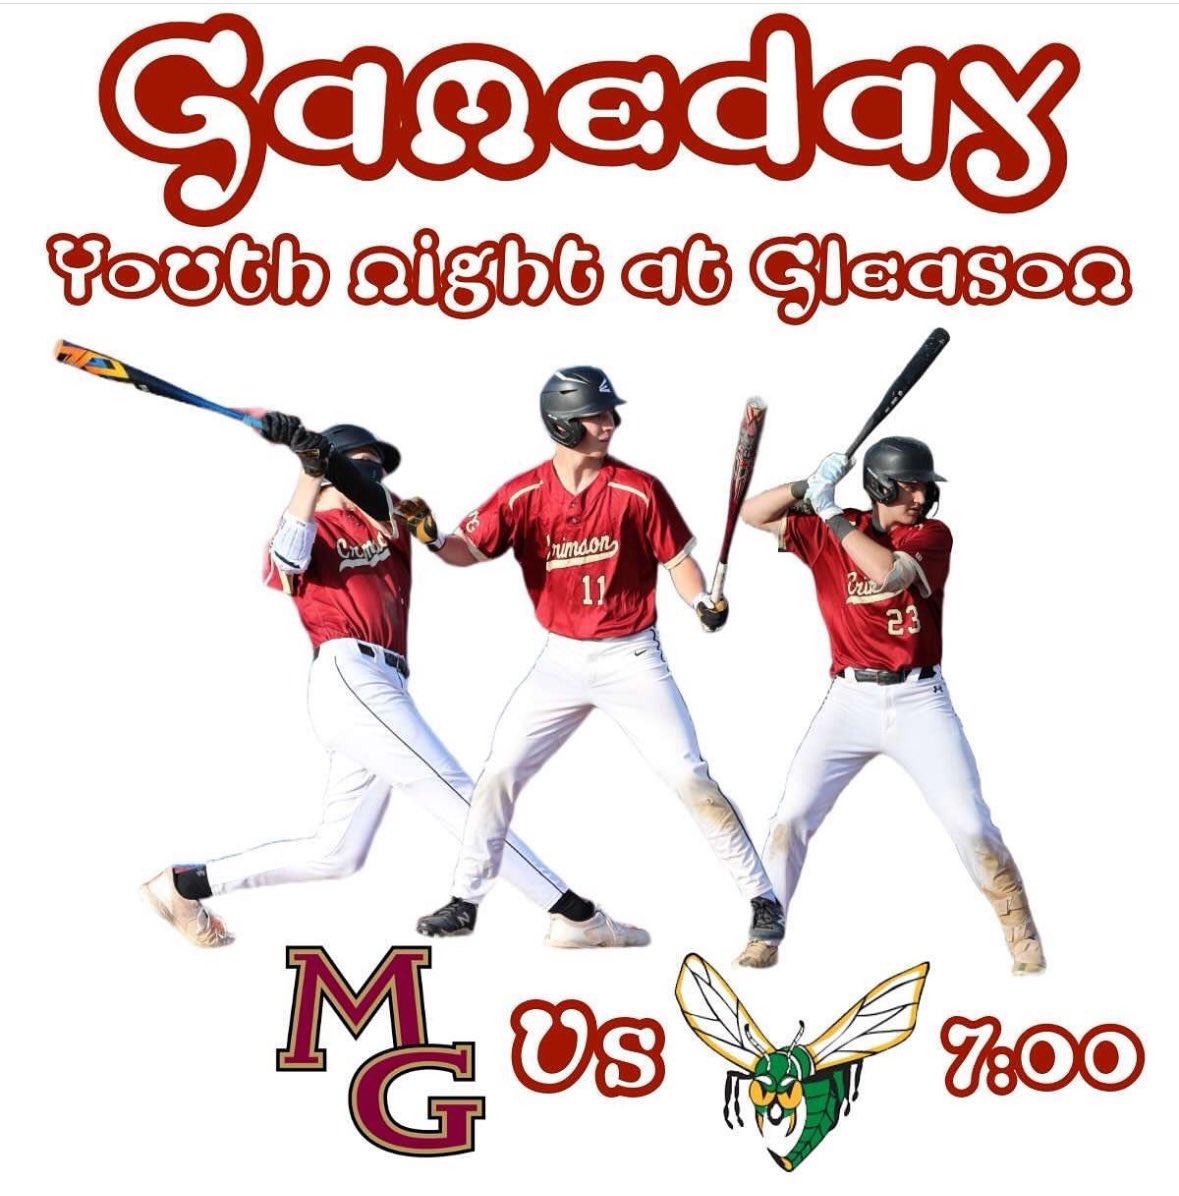 Youth Day with Crimson Baseball tonight! JV at 4:30, Varsity at 7. Both games at Gleason Fields. Autographs, Chik-Fil-A and @MalonesMN burgers for sale! Let’s go!